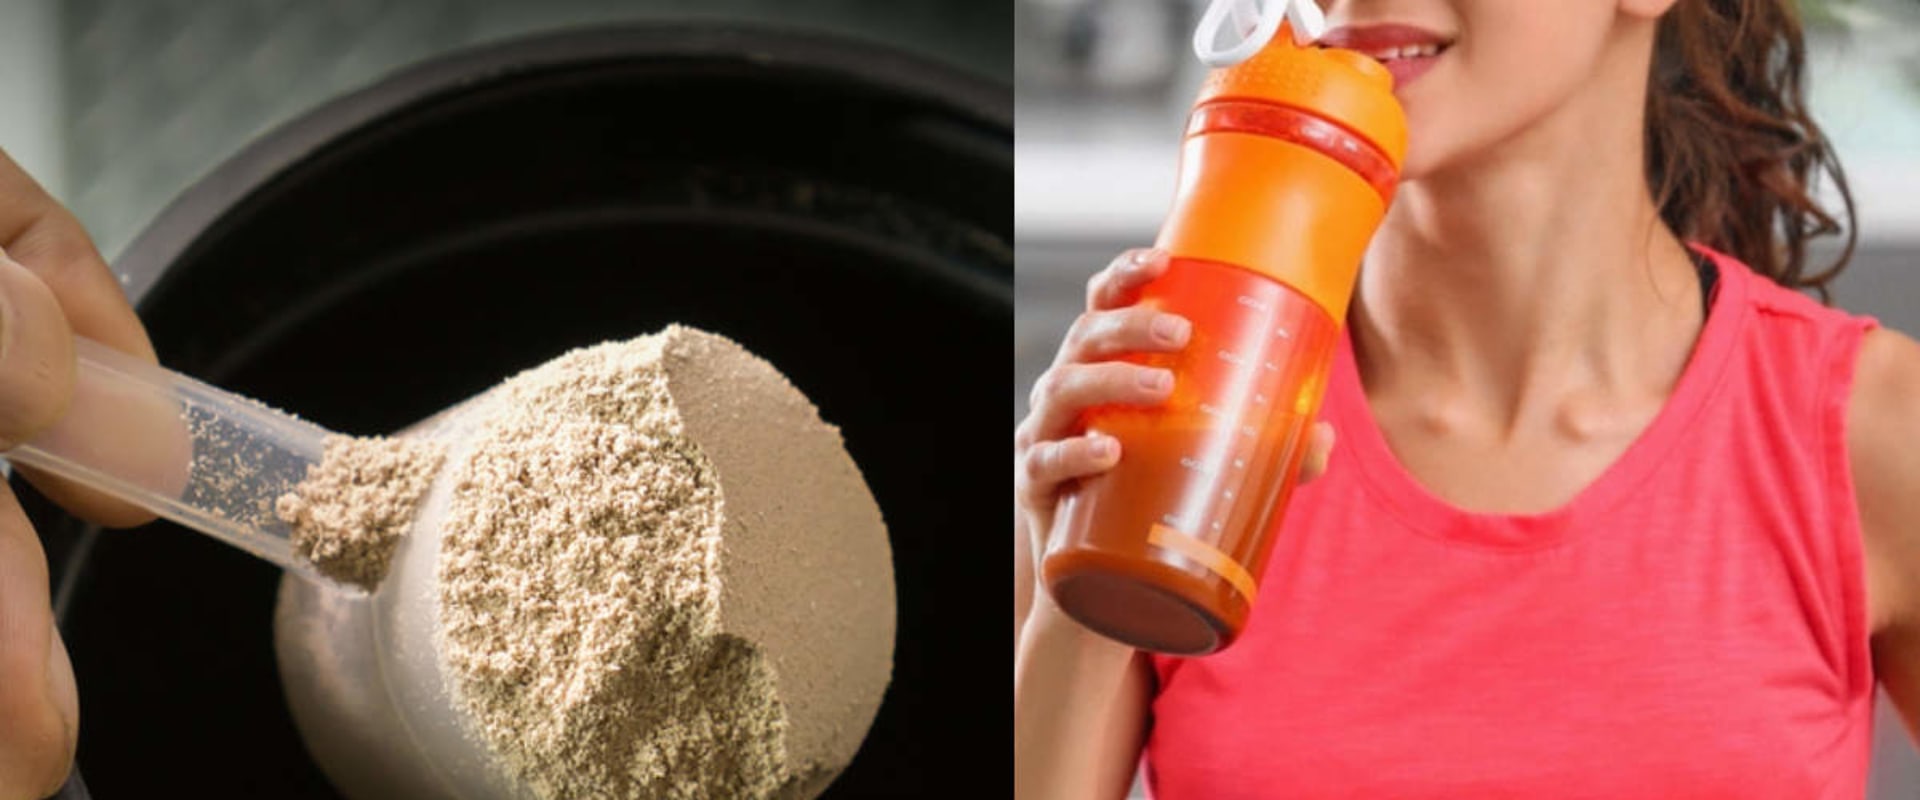 Mixing Protein Powder: What's the Best Way to Do It?